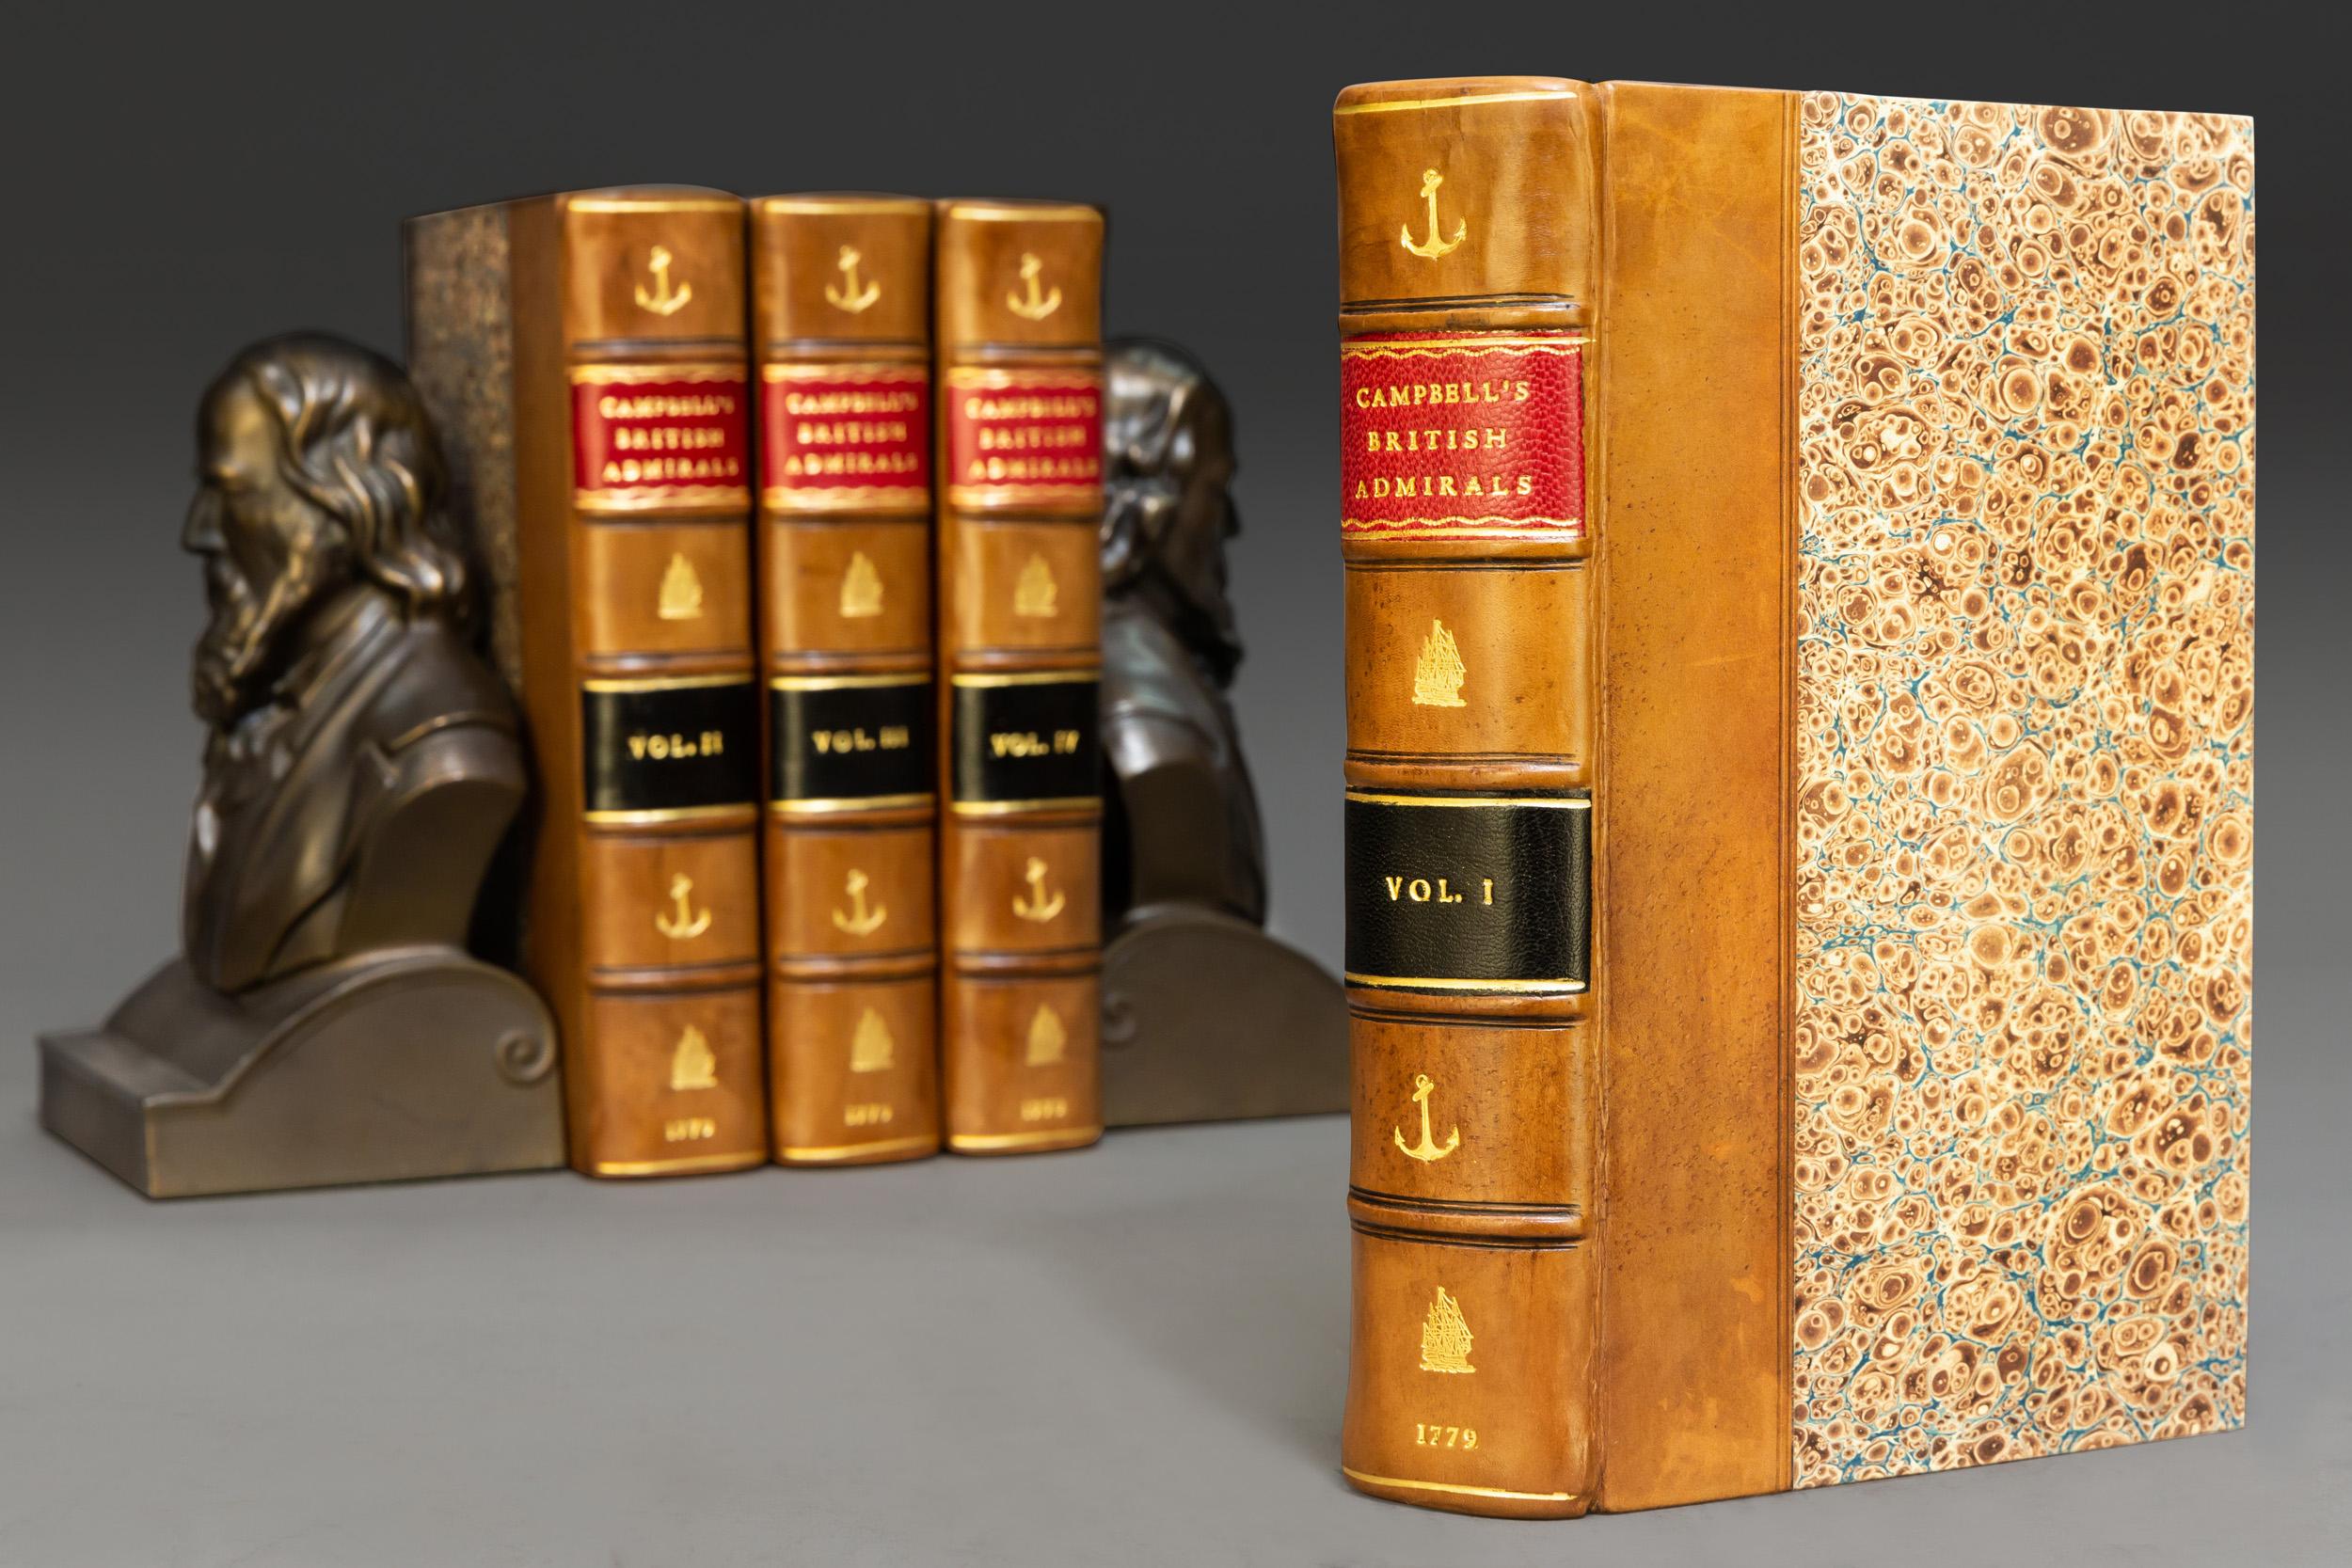 4 Volumes

Containing A New and Accurate Naval History From The Earliest Period. Illustrated with plates and maps.

Rebound in 1/4 tan calf, marbled boards, raised bands, gilt panels.

Published: London: Alexander Donaldson: 1779.